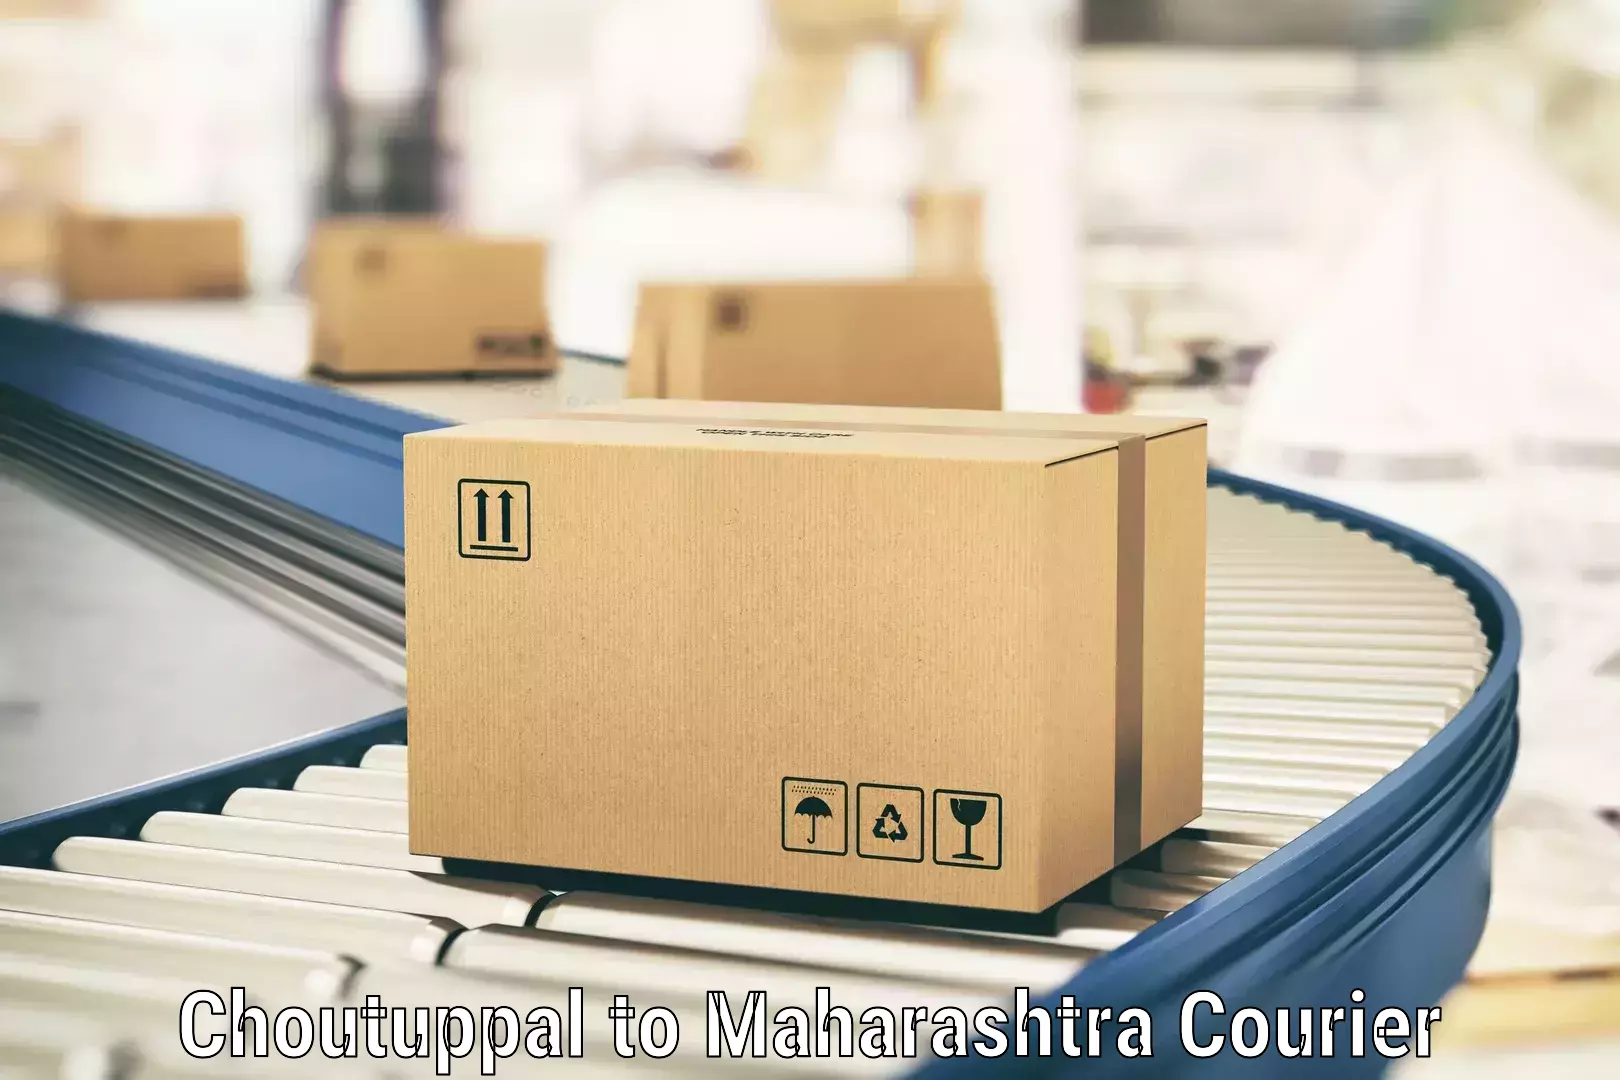 Affordable shipping rates in Choutuppal to Symbiosis International Pune